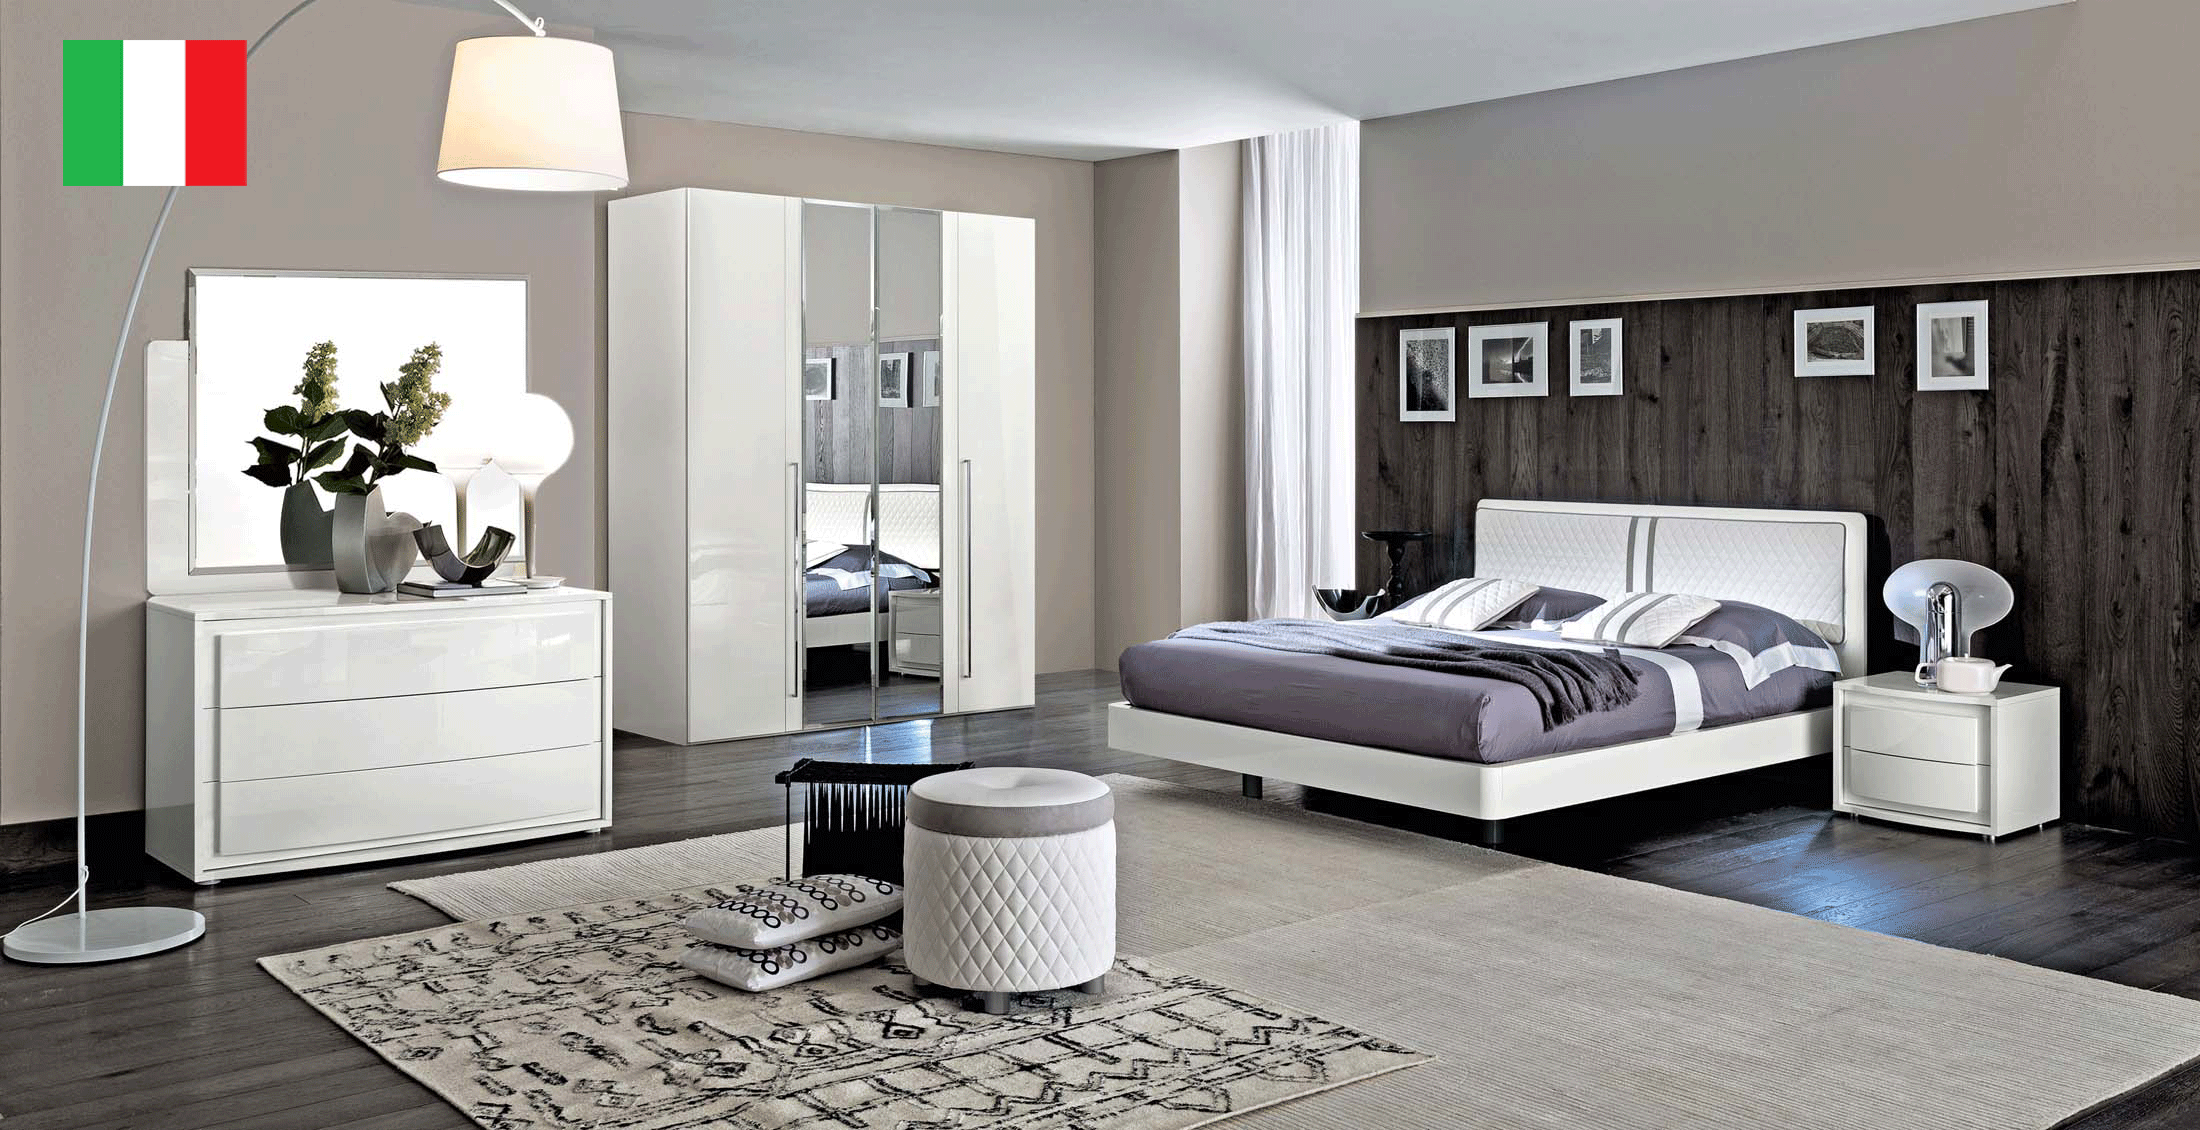 Brands Camel Modum Collection, Italy Dama Bianca Bedroom by CamelGroup Italy